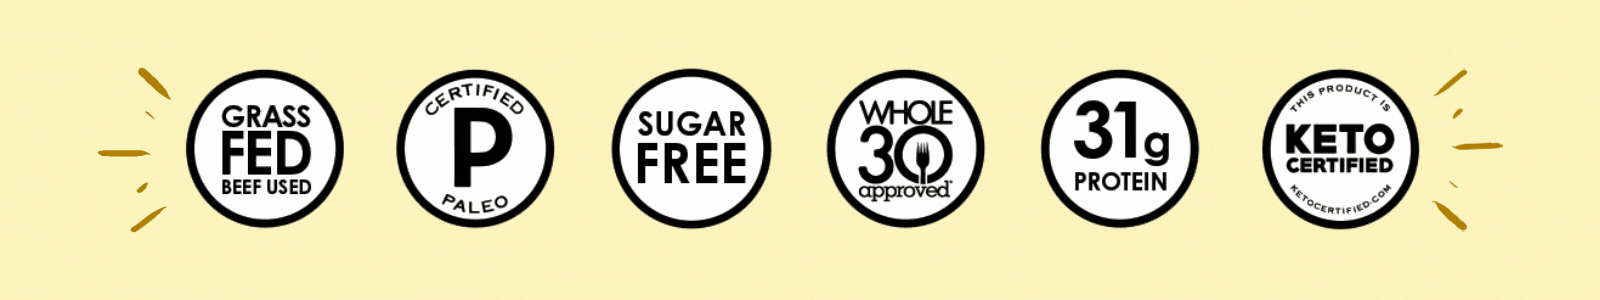 Ayoba is Now Whole30 Approved!